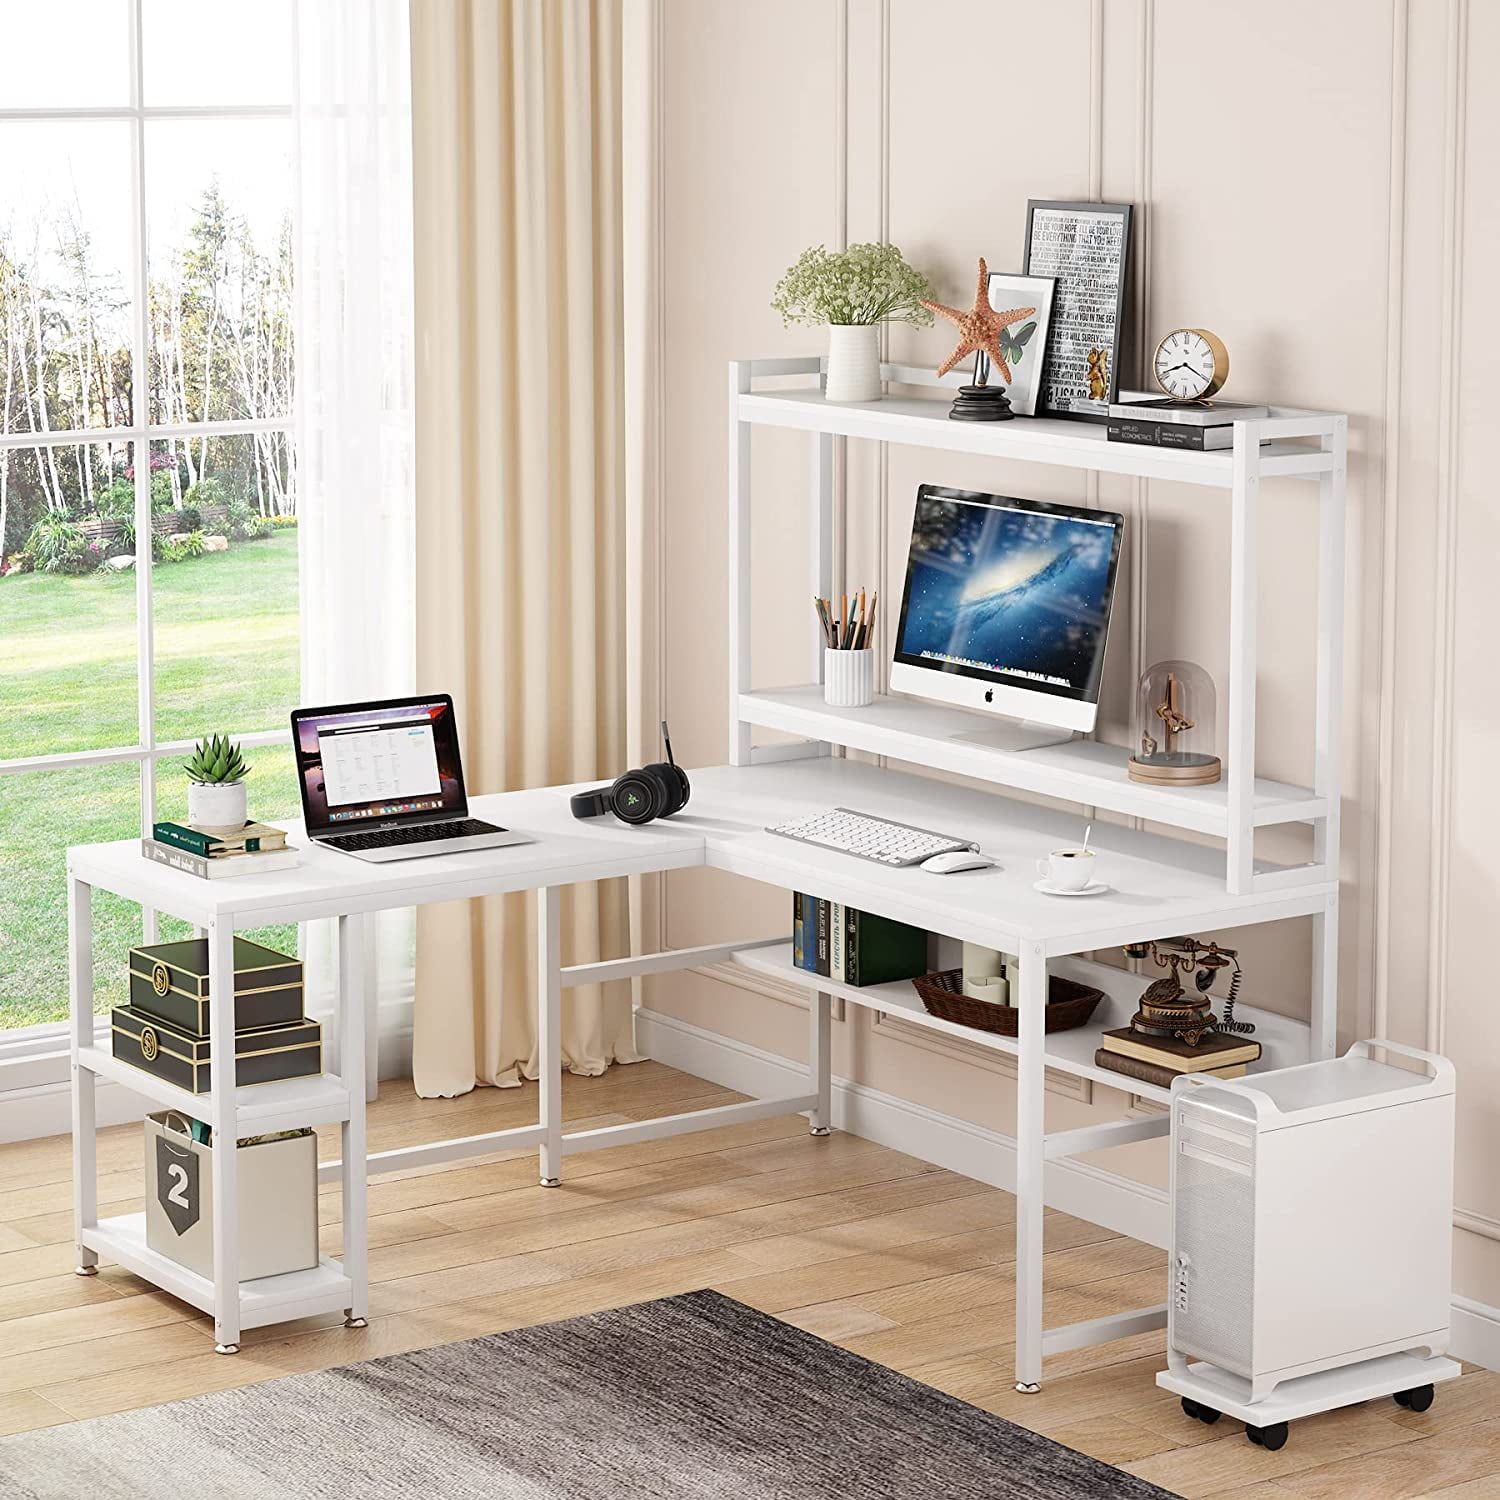 Office Computer Desk with Shelf Modern PC Desk Home Office Study Laptop Table LY 